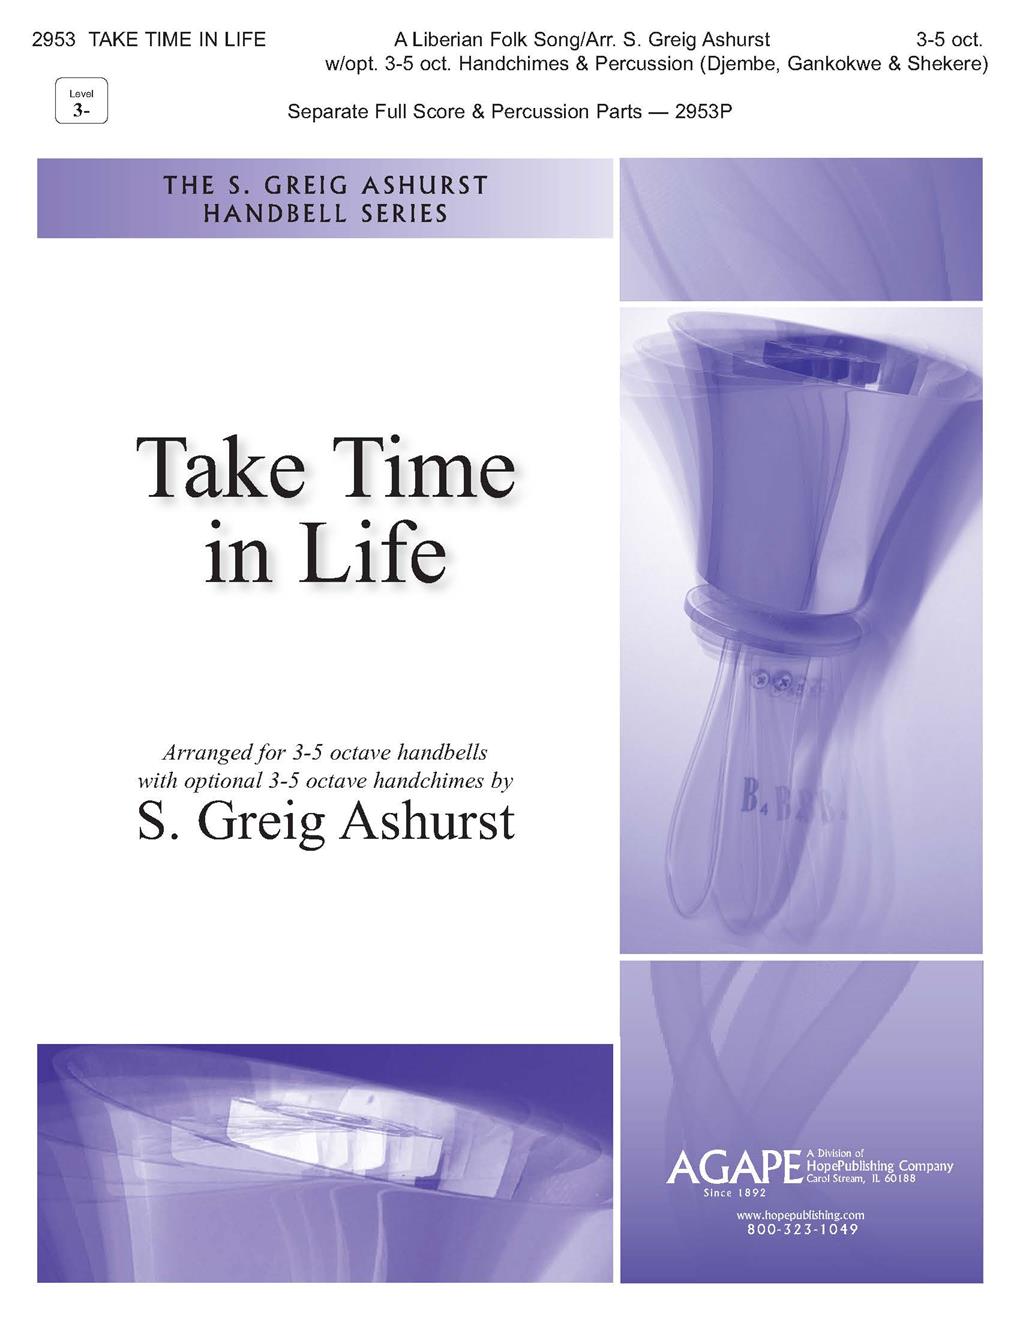 Take Time in Life - 3-5 Oct. Cover Image